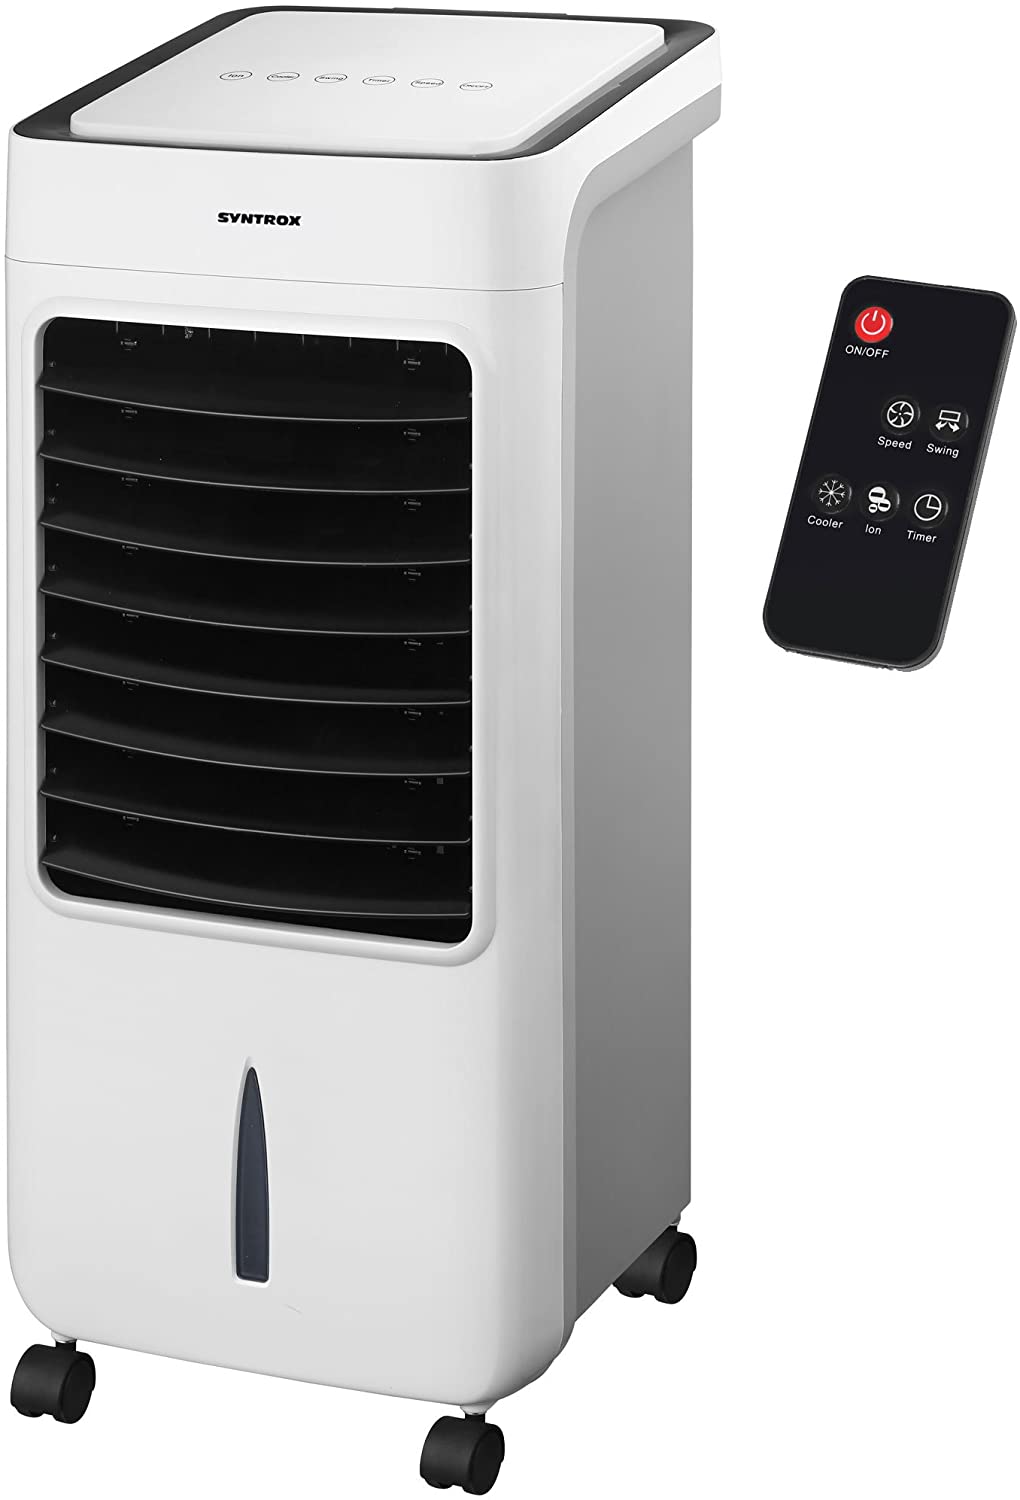 Syntrox Germany 4-in-1 Air Cooler, Humidifier, Air Freshener and Fan with Touch Panel and Remote Control, Air Flow 900 m³/h, AC 80 W, 8 l, Breeze